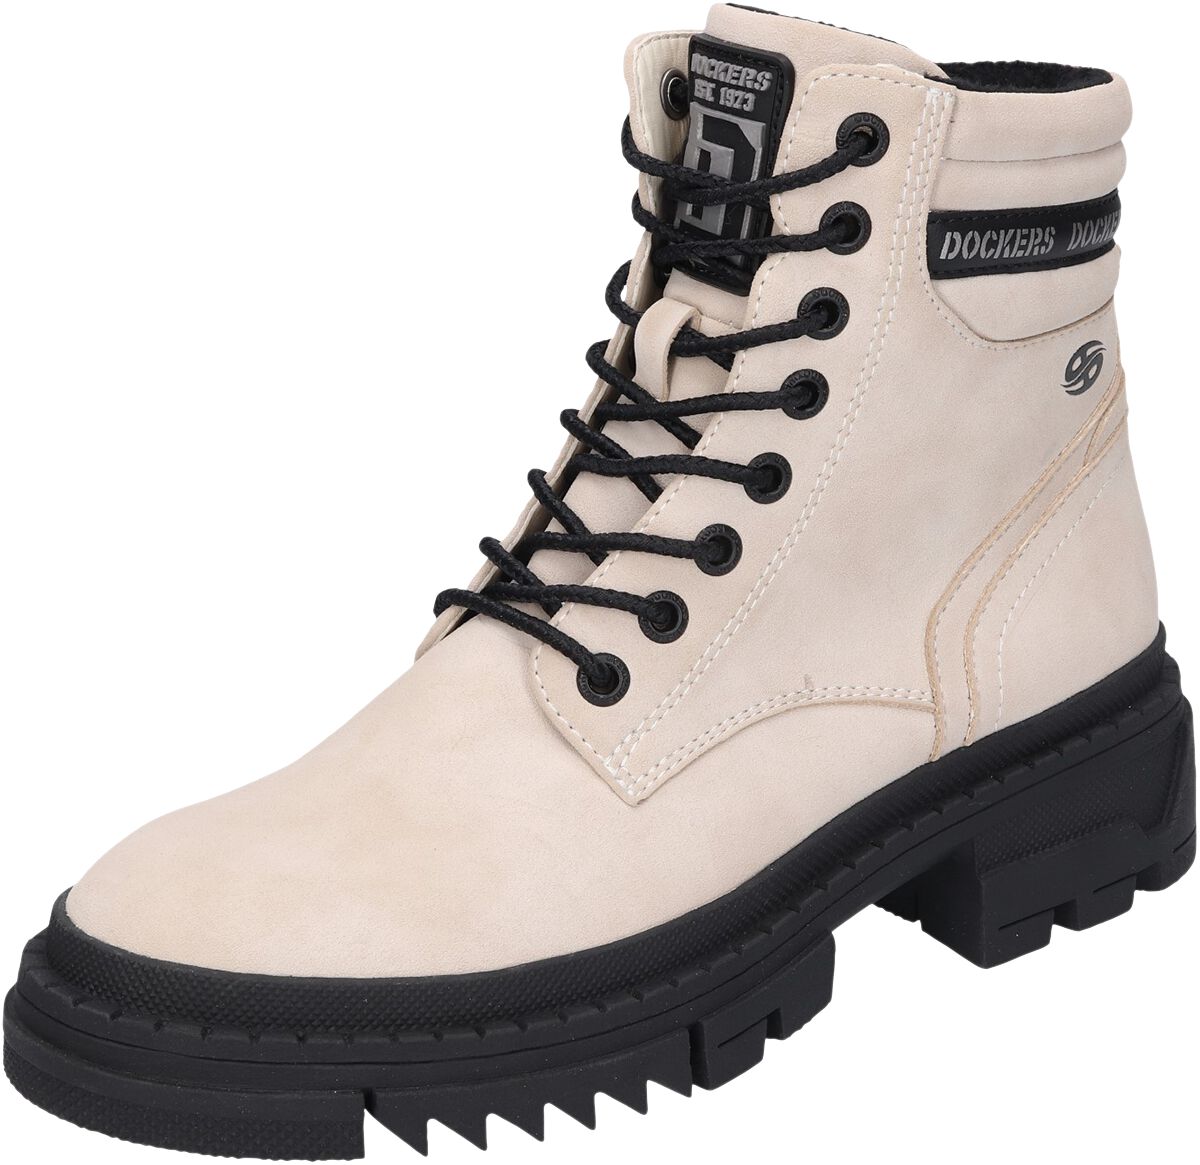 Dockers by Gerli Lace-Up Boots Boot cream black